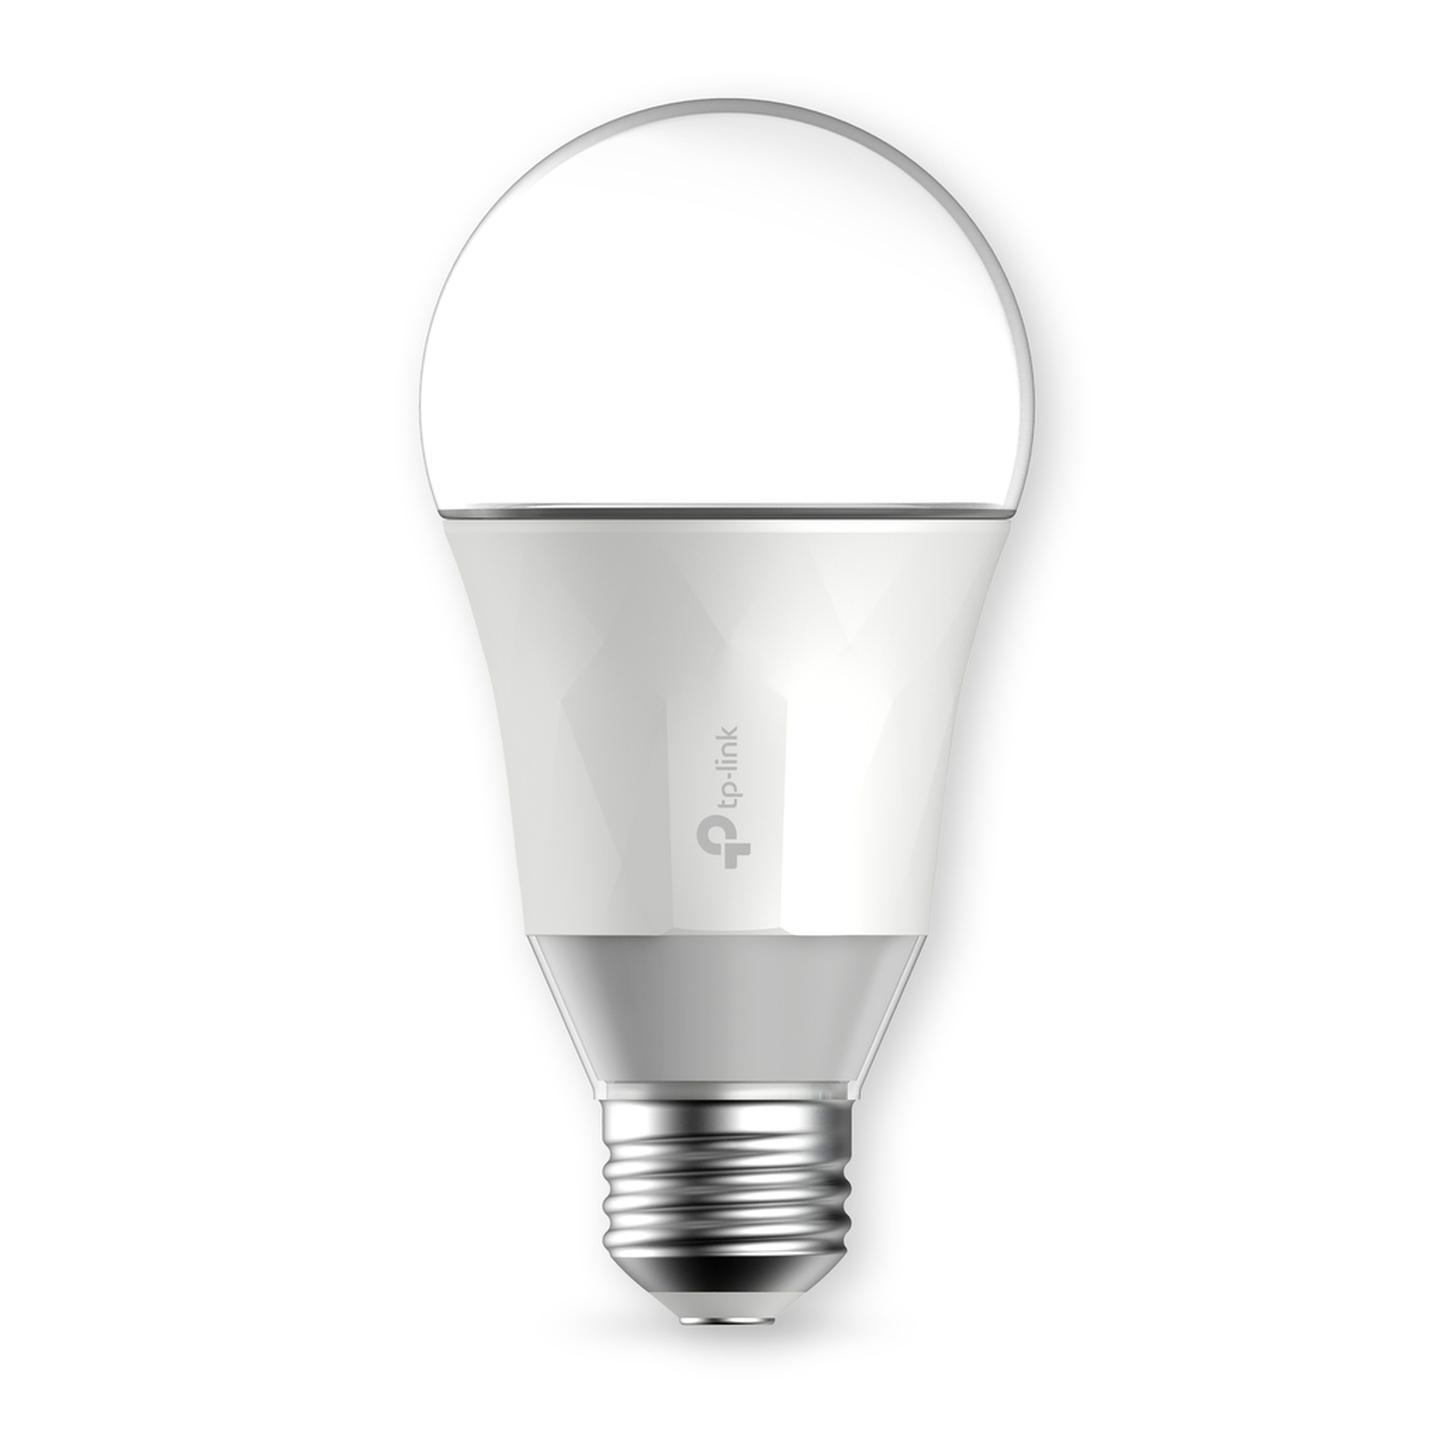 TP-Link Smart Wifi LED Bulb with dimmable 600 Lumen